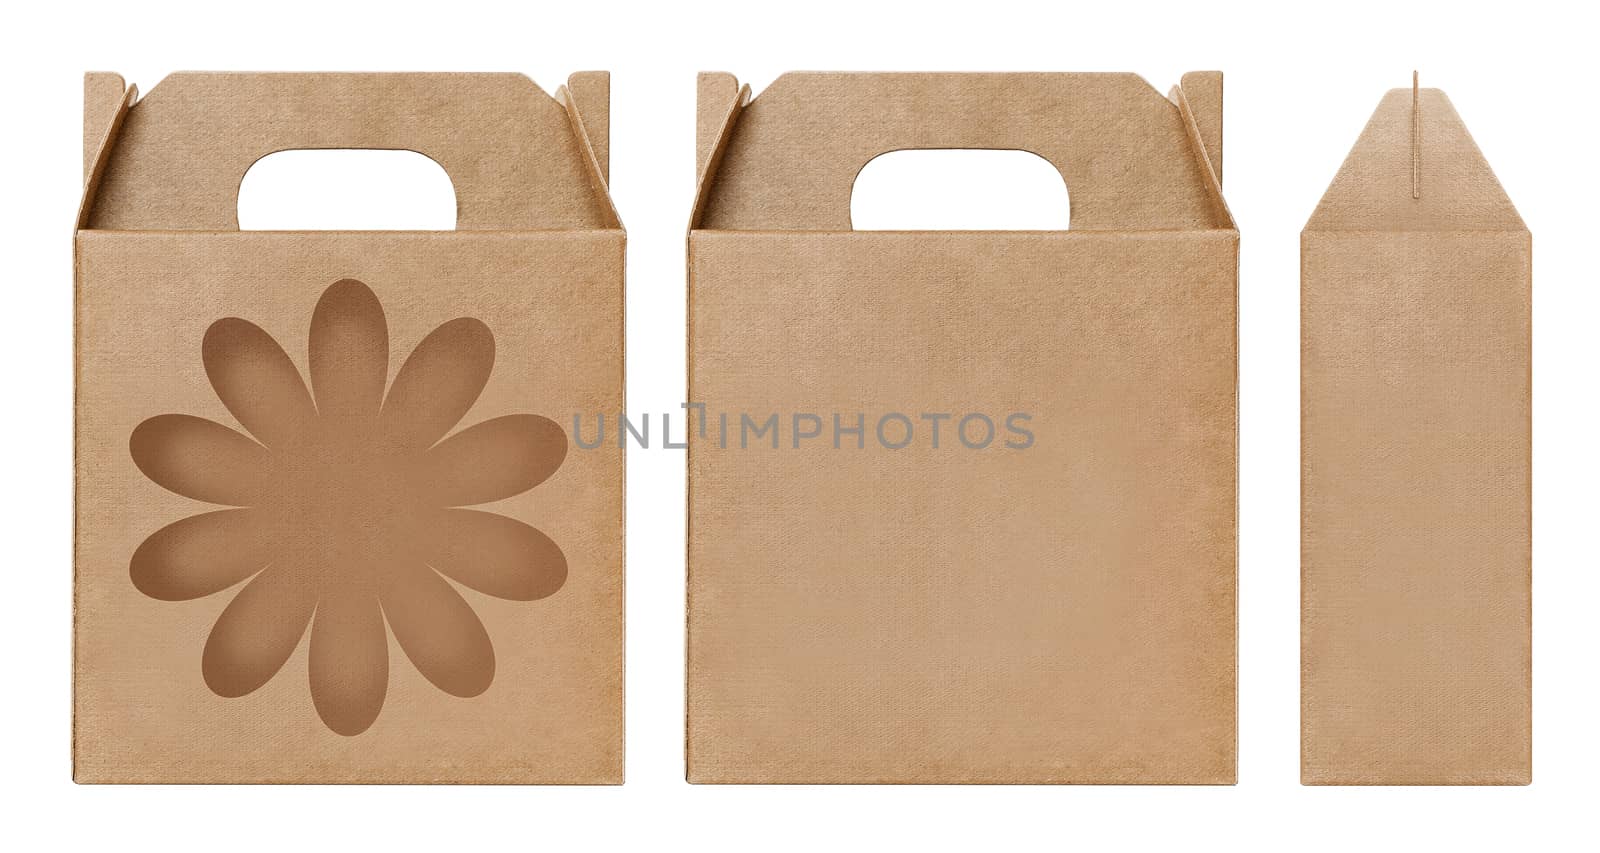 Box brown window Flower shape cut out Packaging template, Empty kraft Box Cardboard isolated white background, Boxes Paper kraft natural material, Gift Box Brown Paper from Industrial Packaging carton by cgdeaw